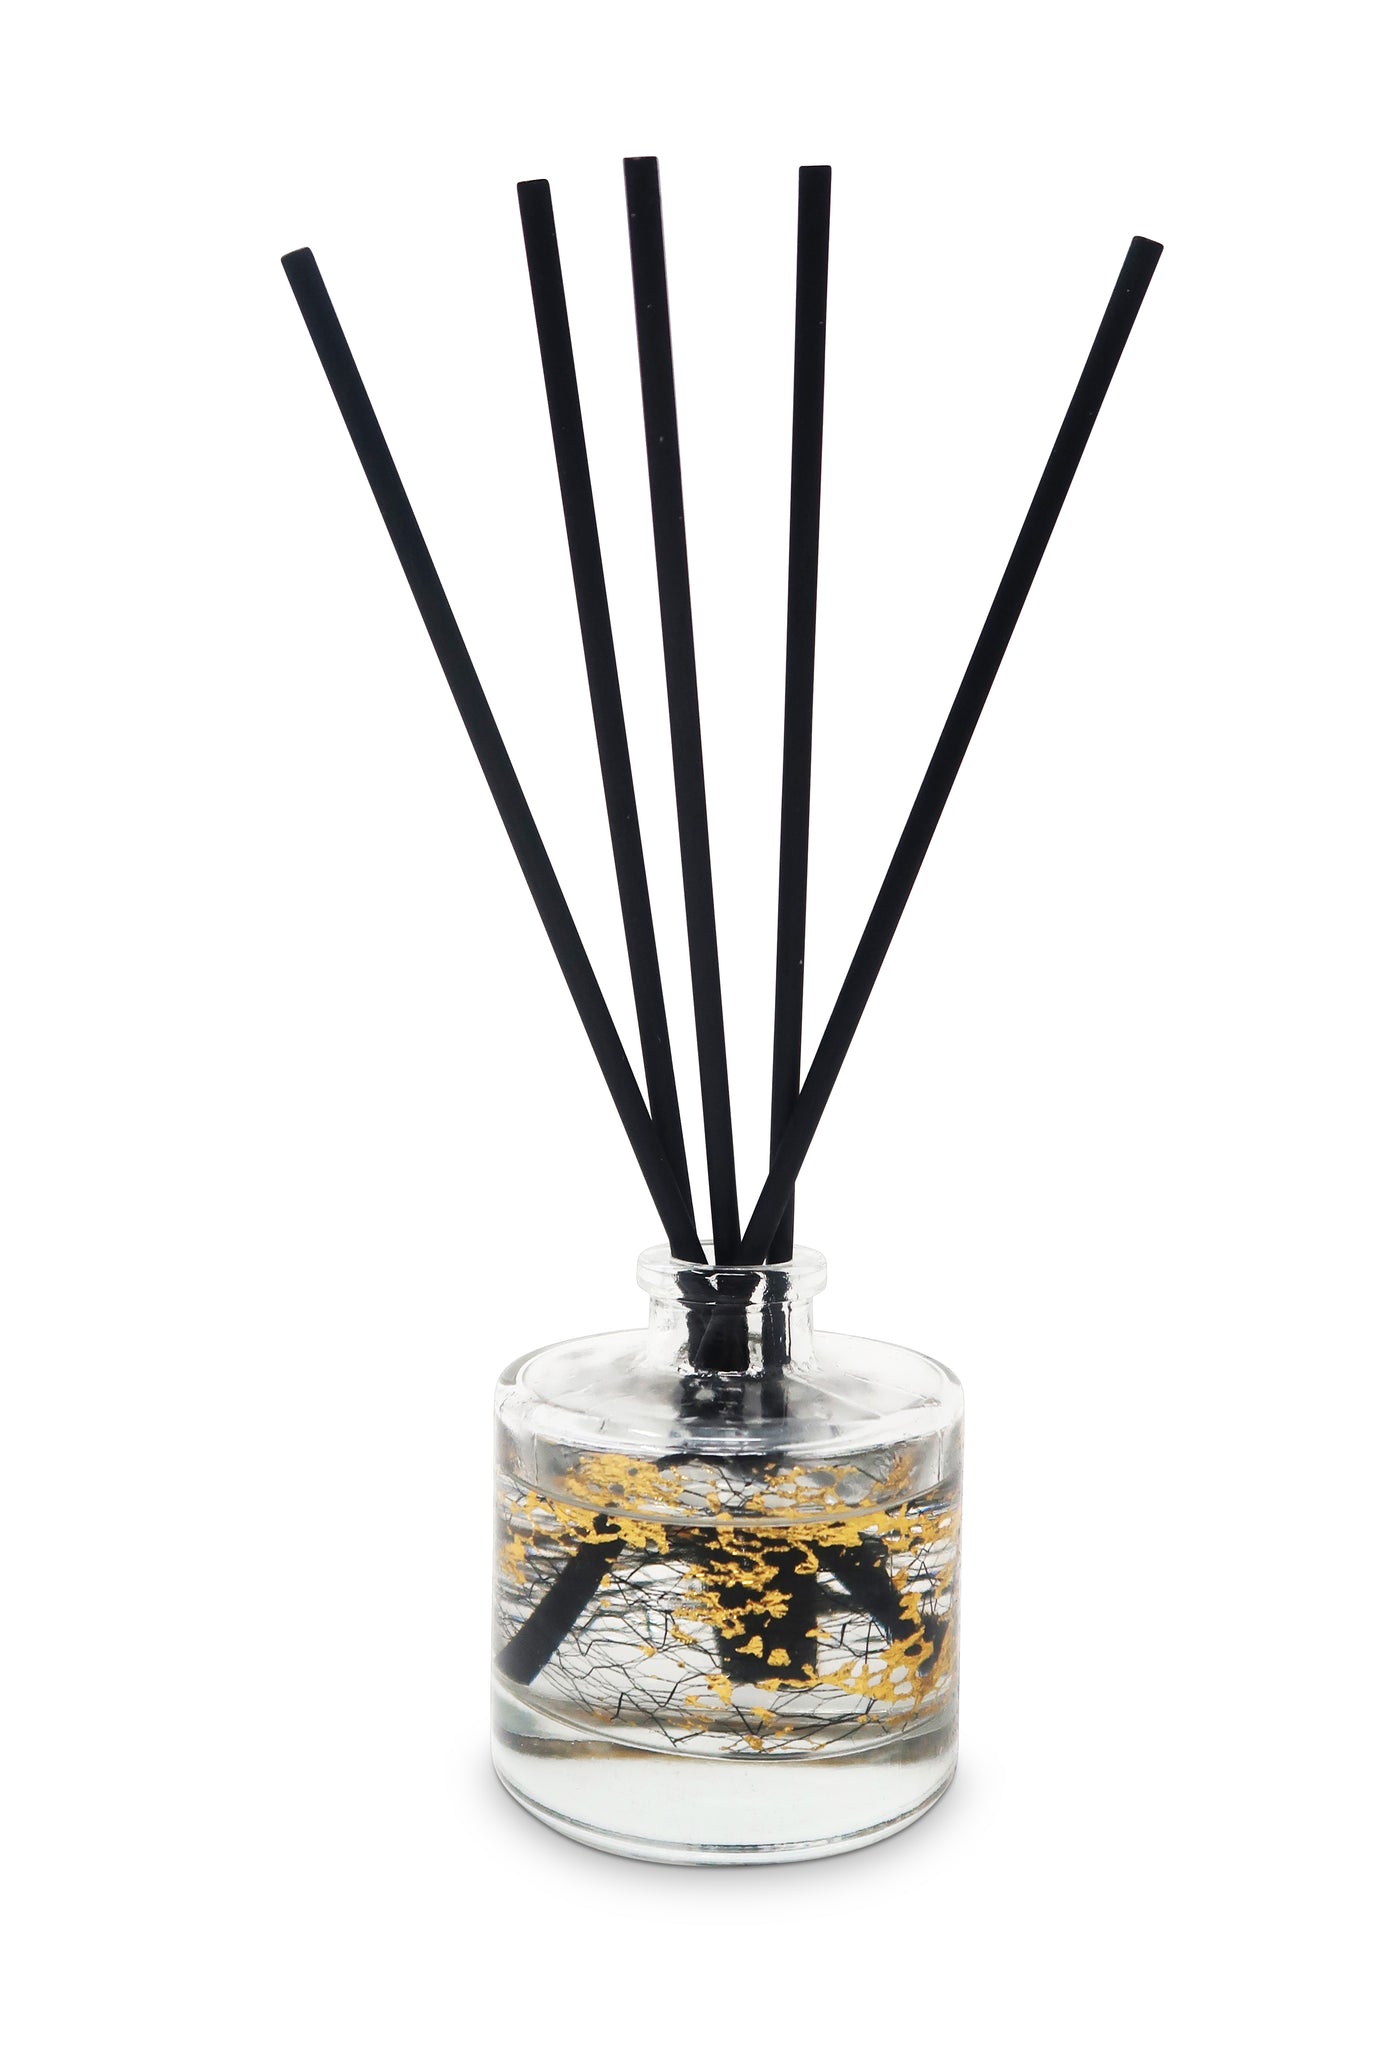 Gold Splattered Reed Diffuser with Black Reeds - White Flower Scent